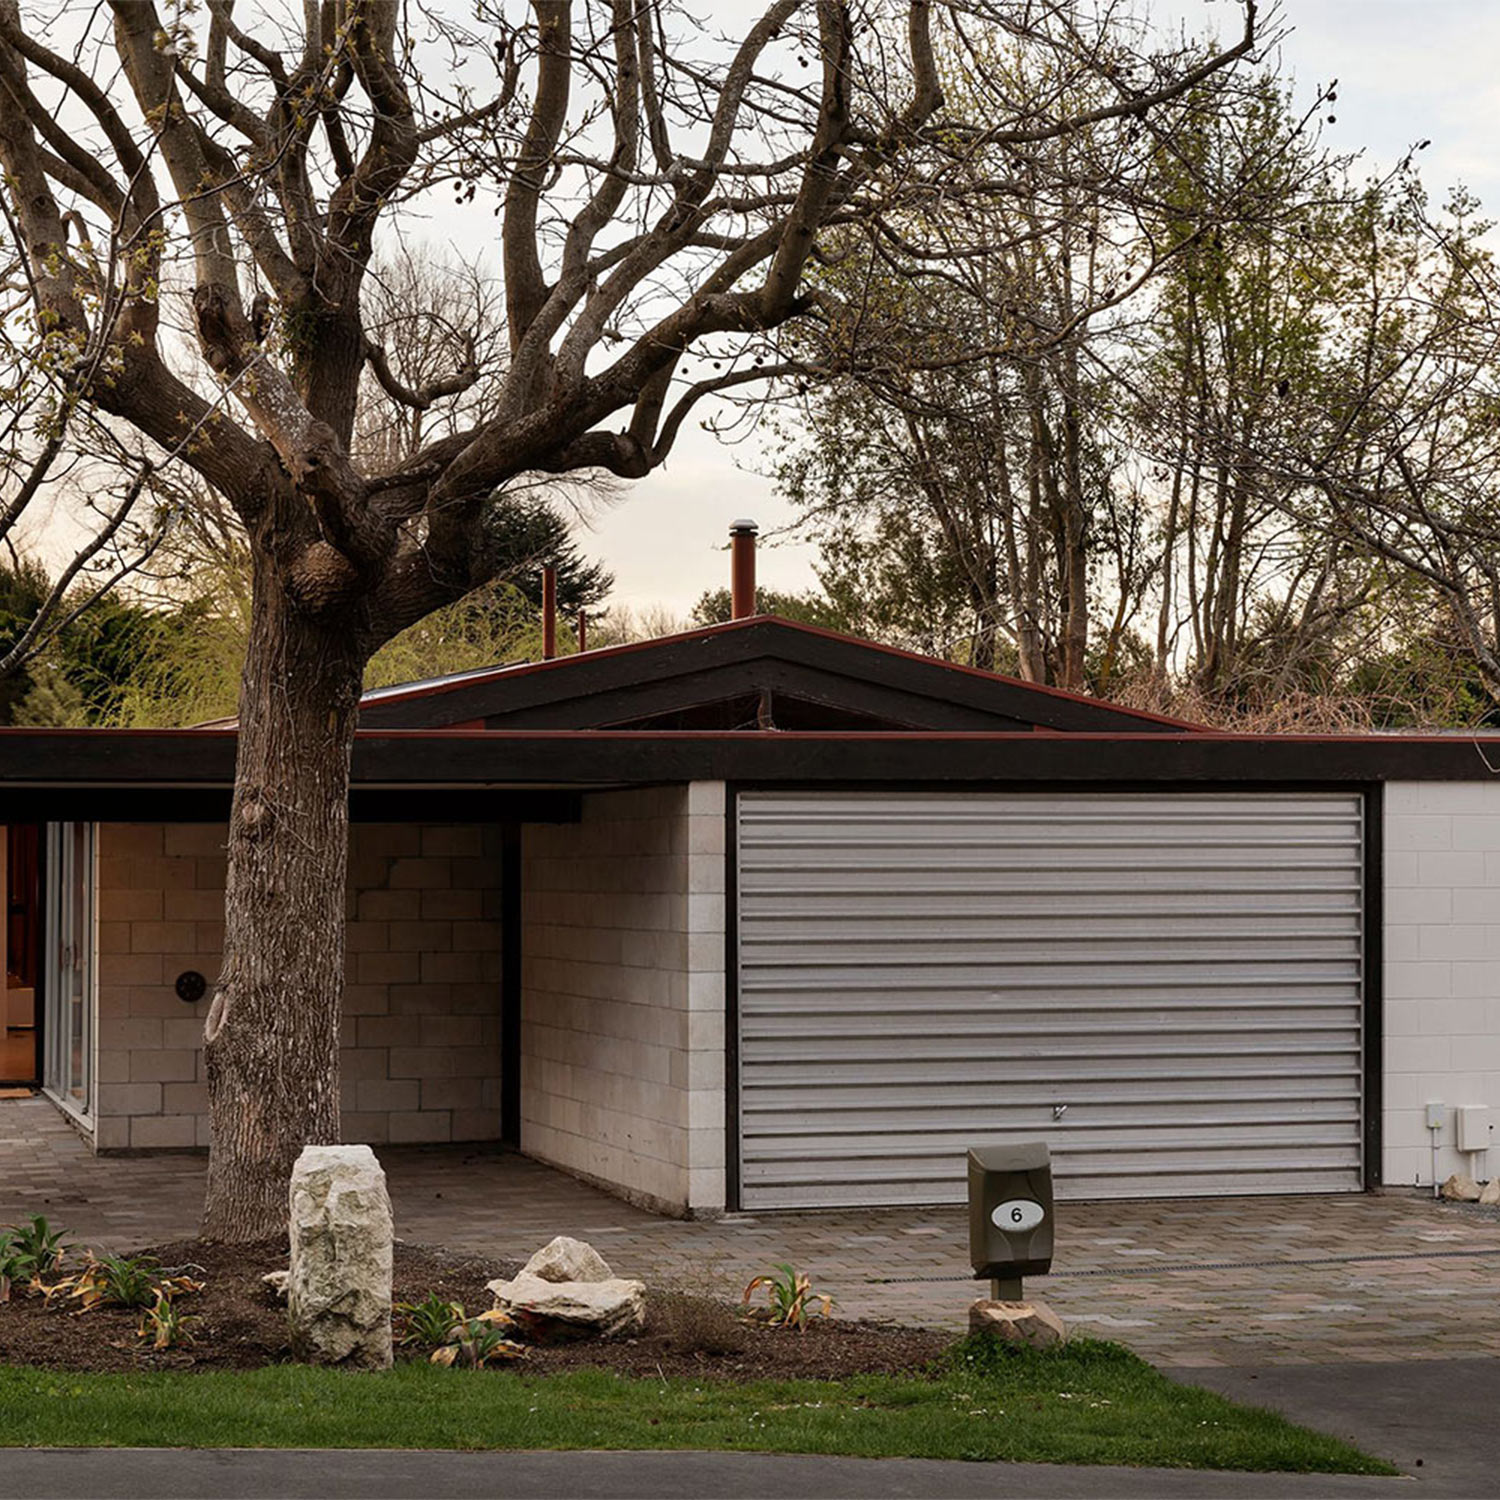 Behind the photoshoot: Celebrating Christchurch’s mid-century architecture